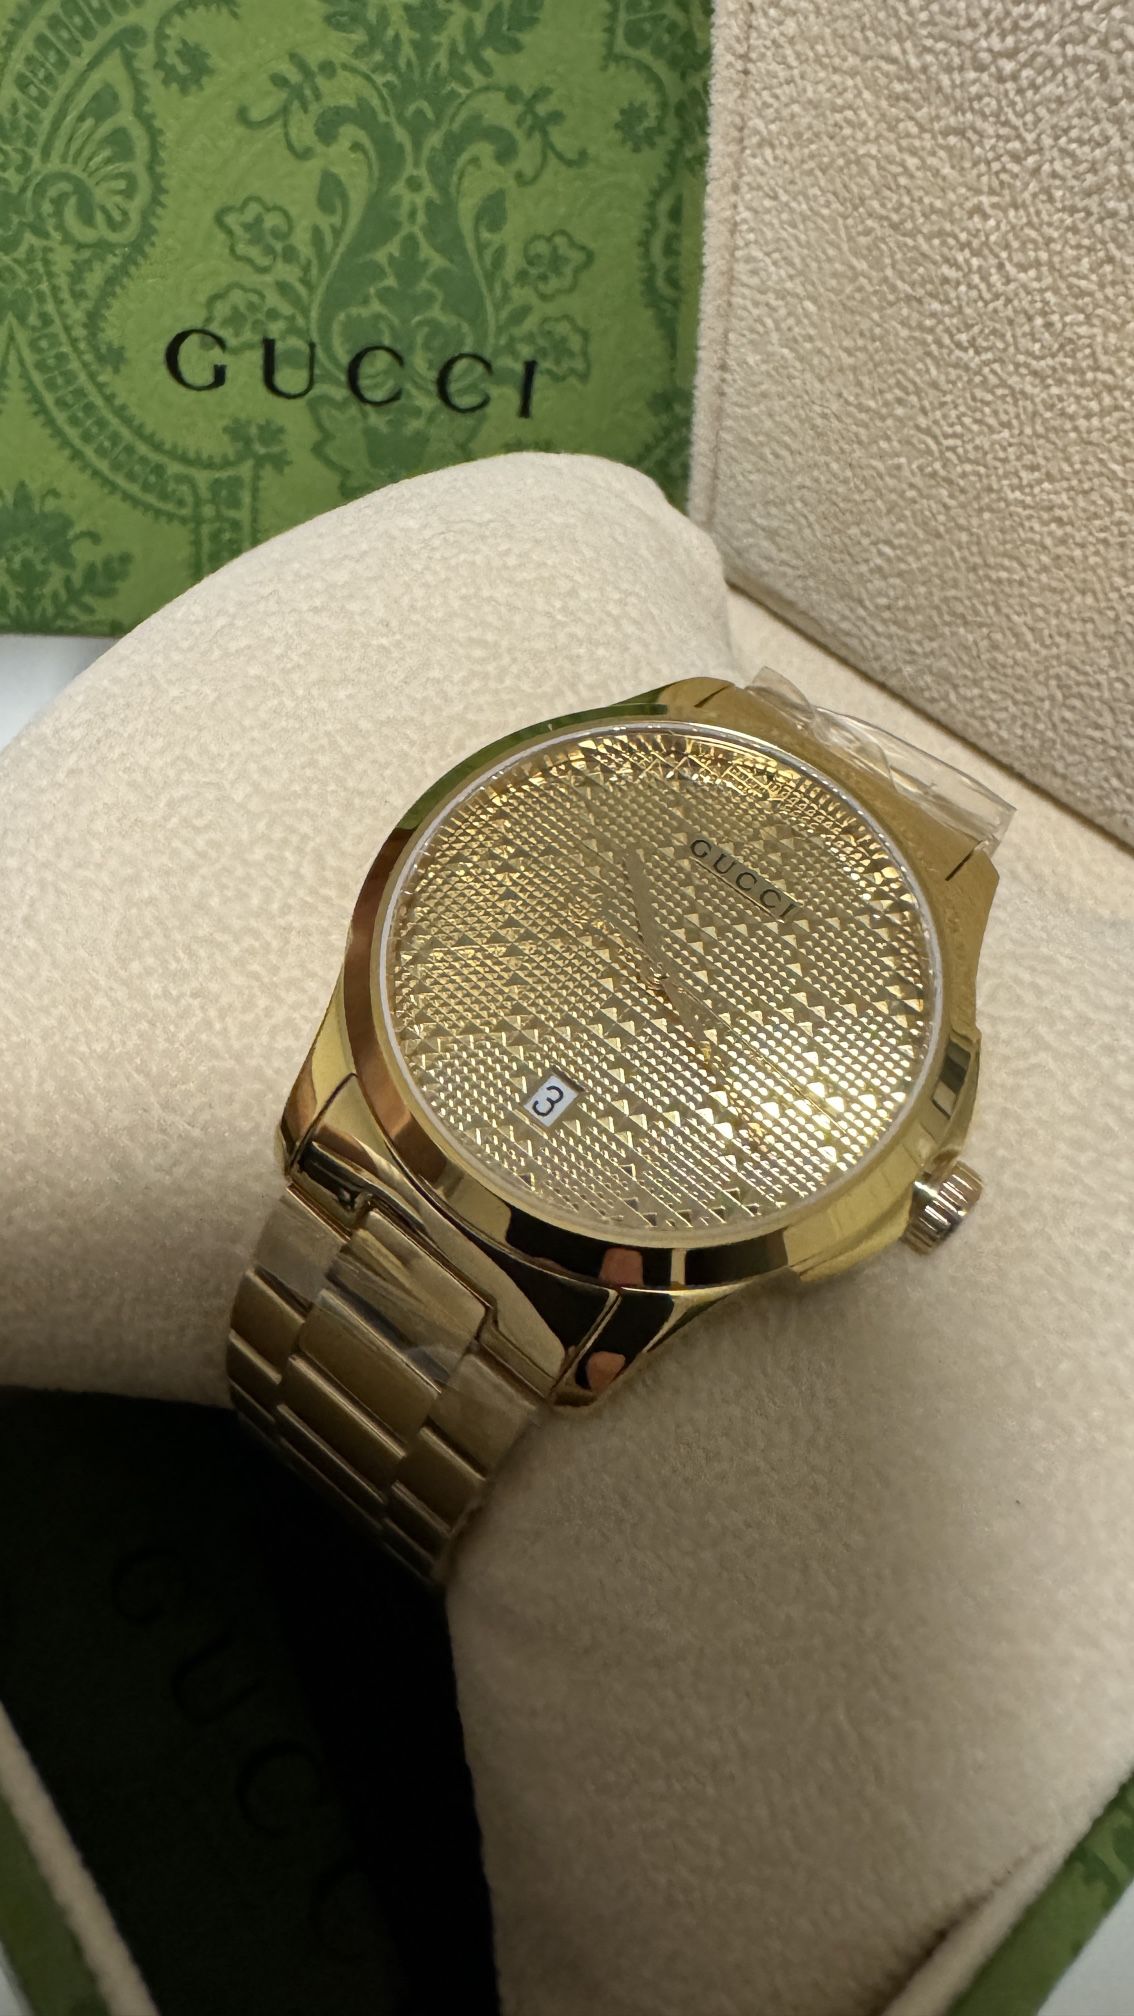 Gucci Timeless Gold Tine Unisex Watch